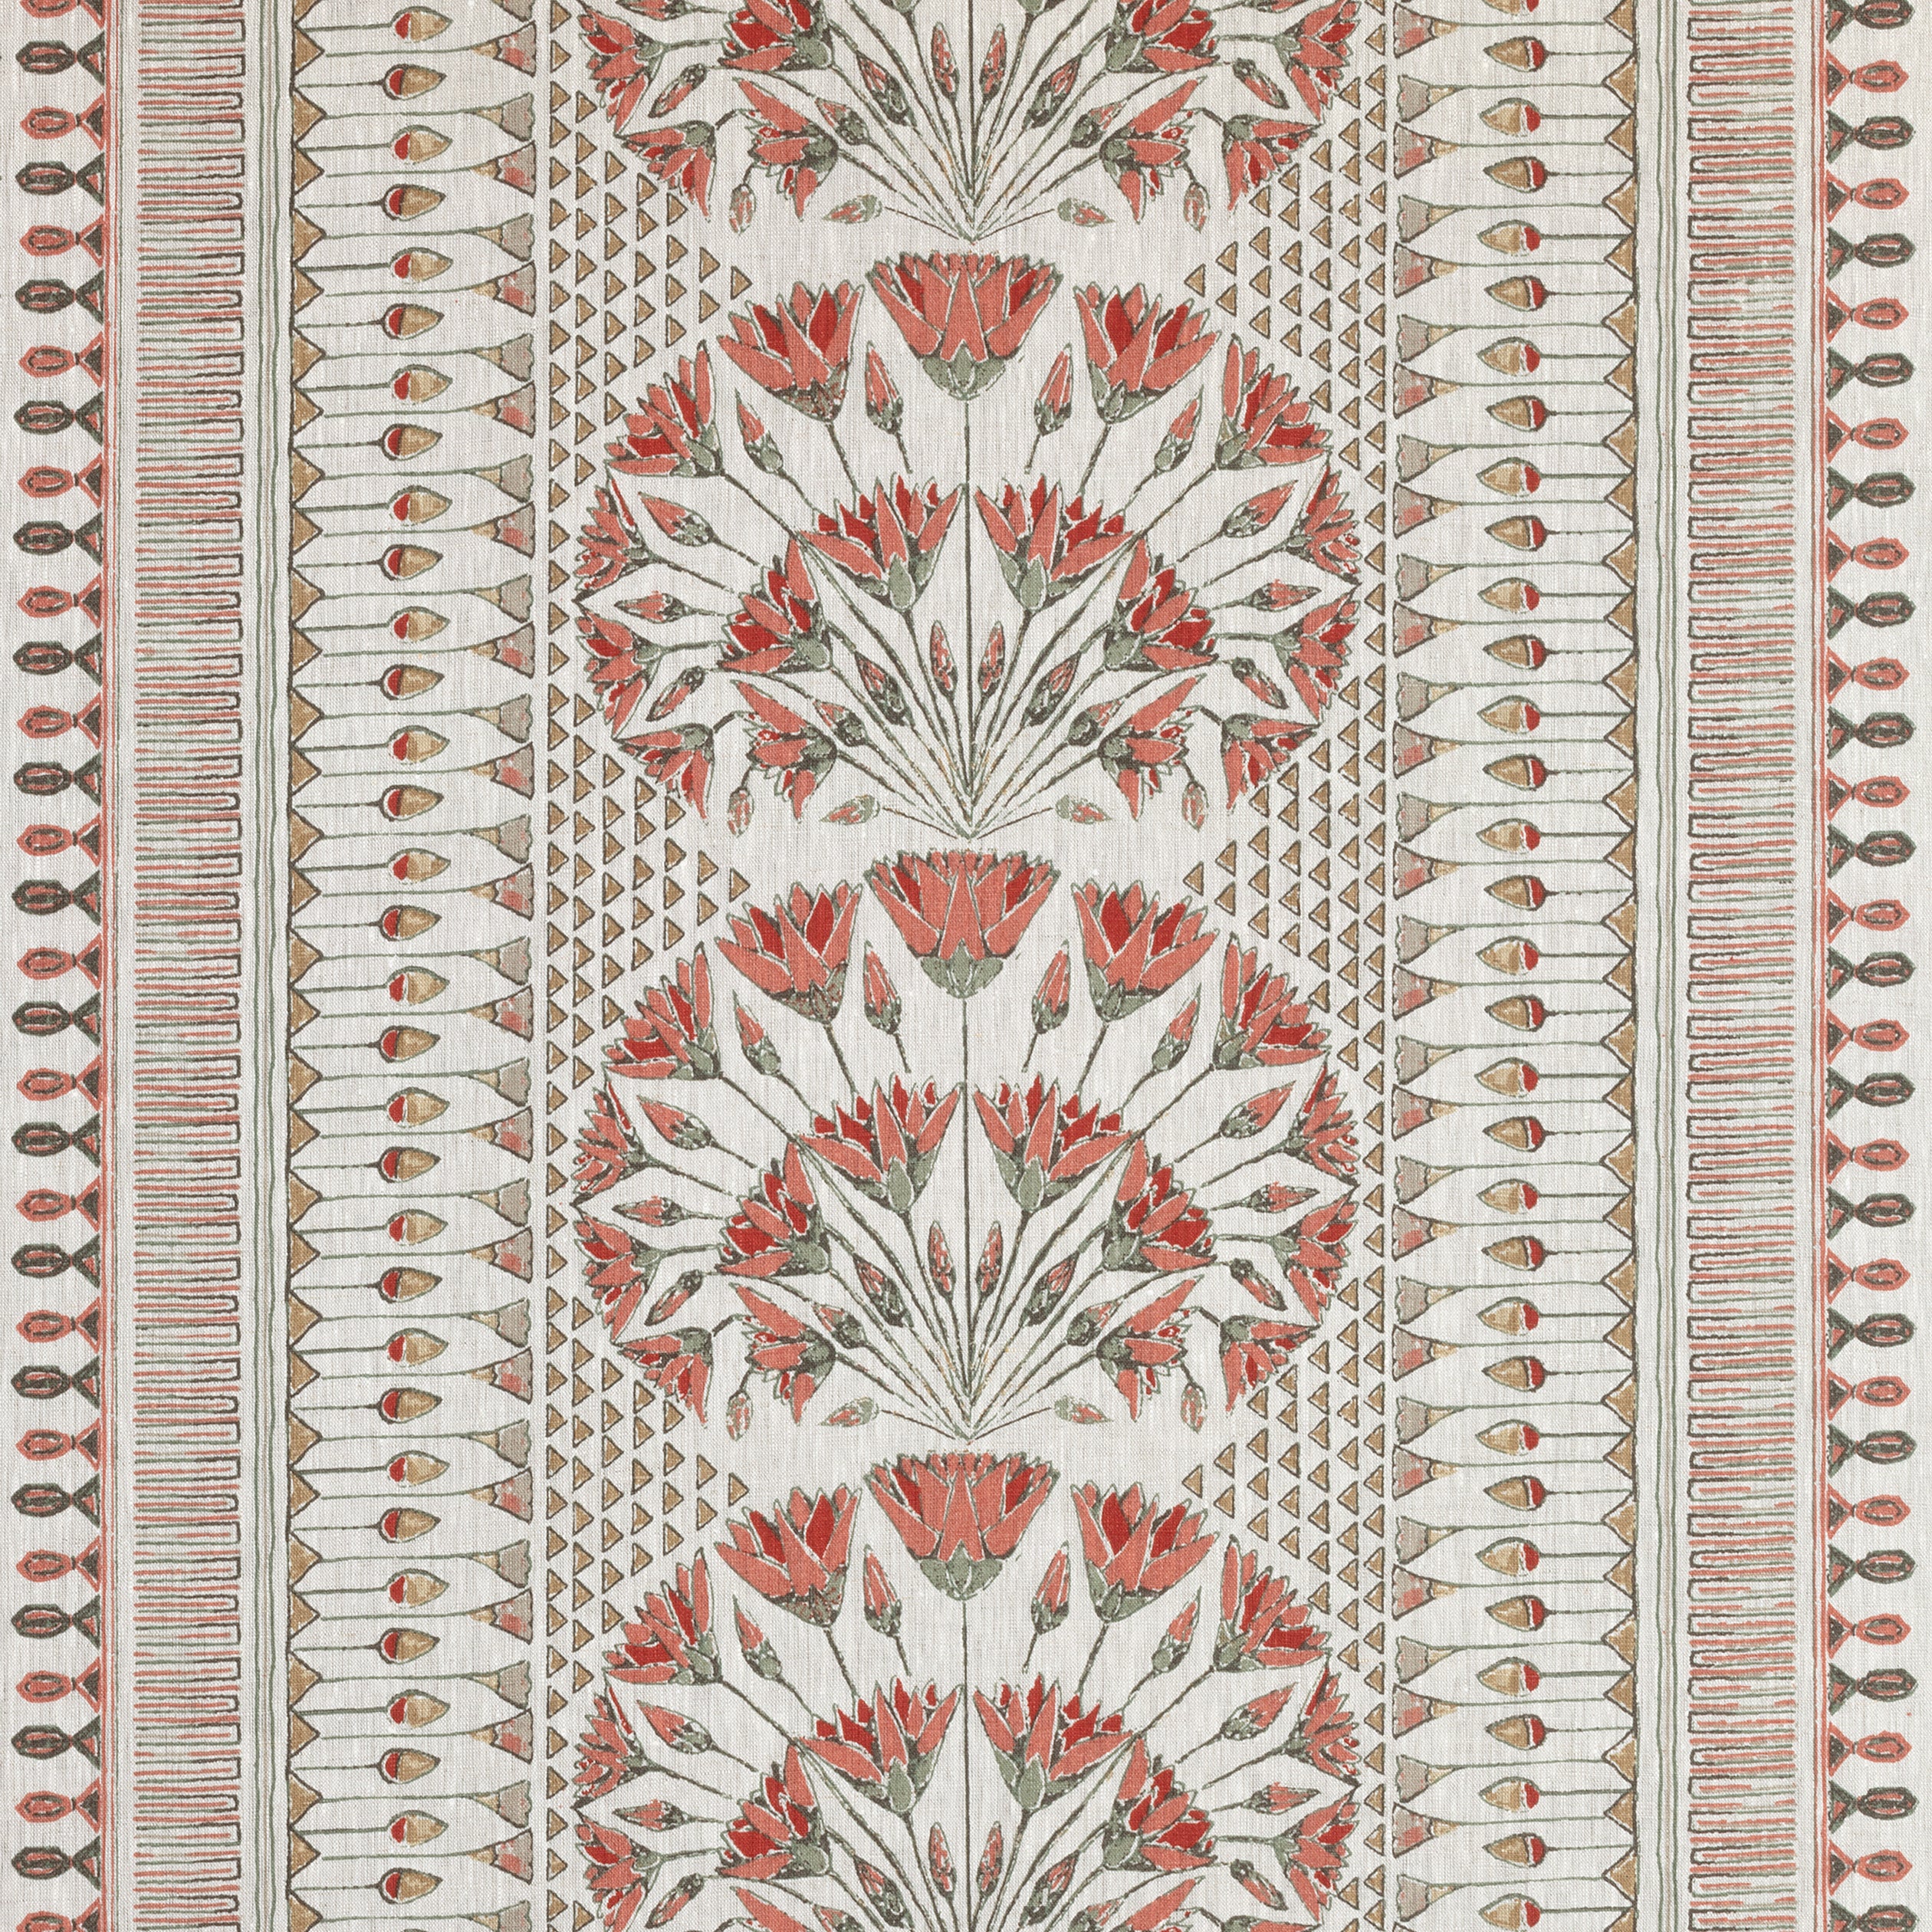 Cairo fabric in coral  color - pattern number AF9628 - by Anna French in the Savoy collection